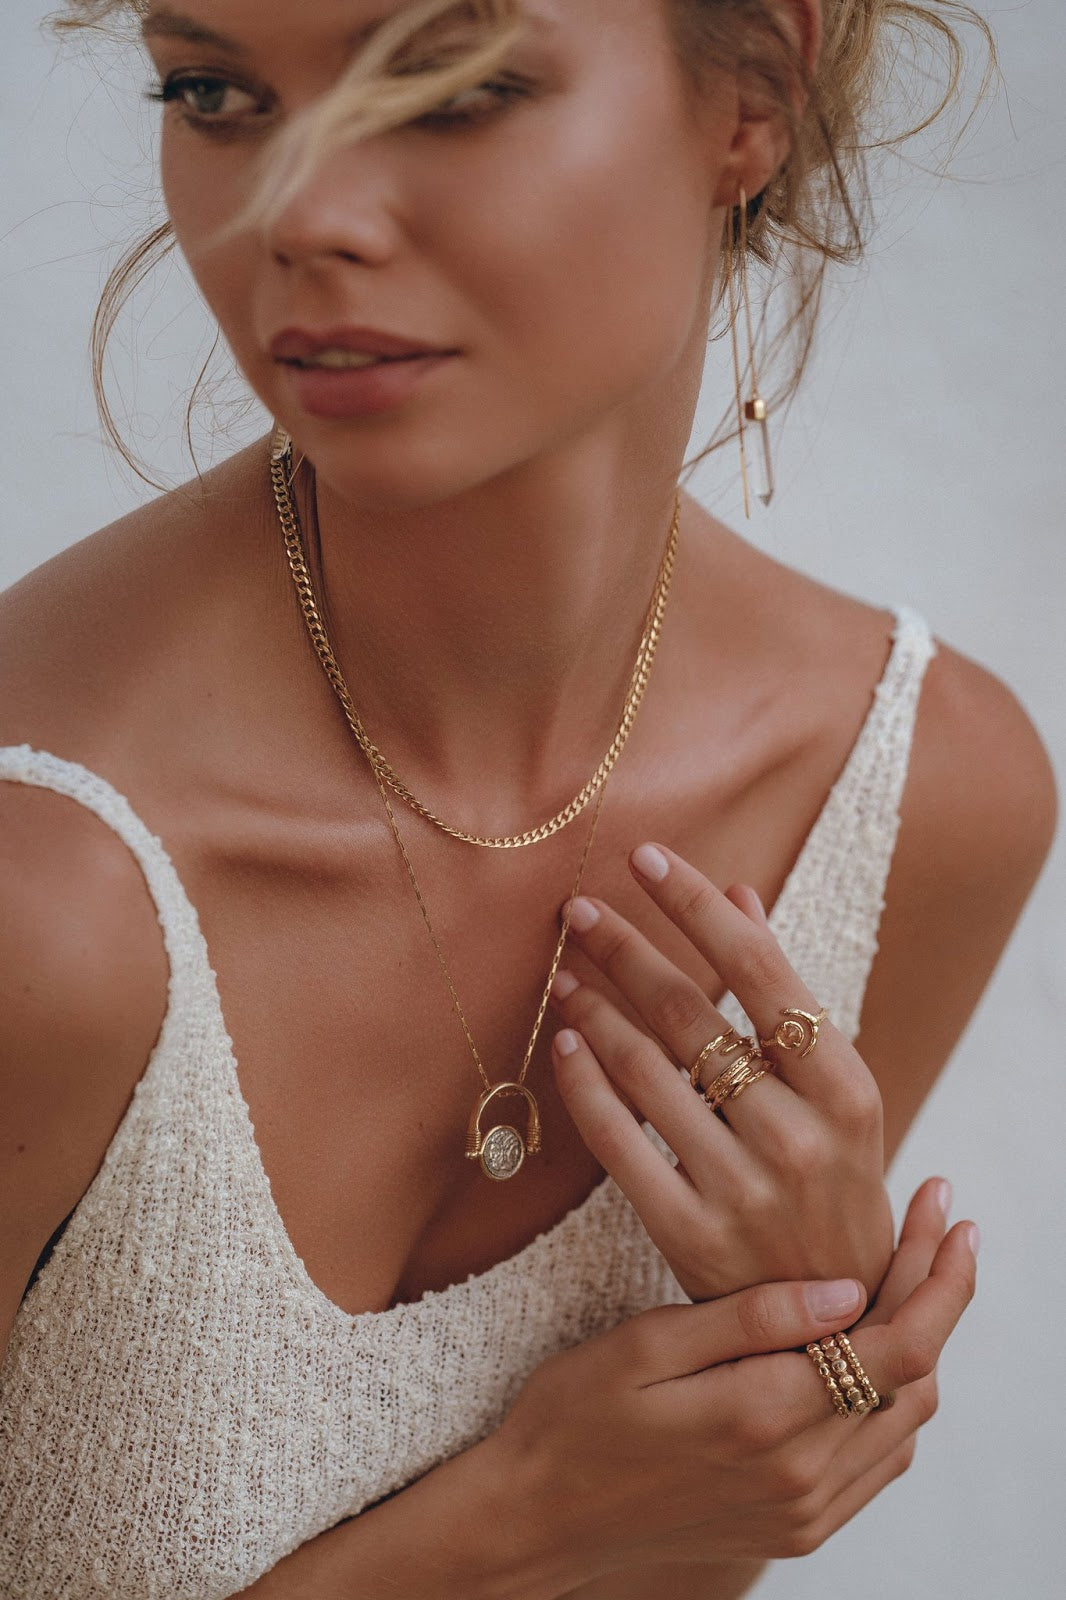 How to Take Care of Your Gold and Silver Jewelry